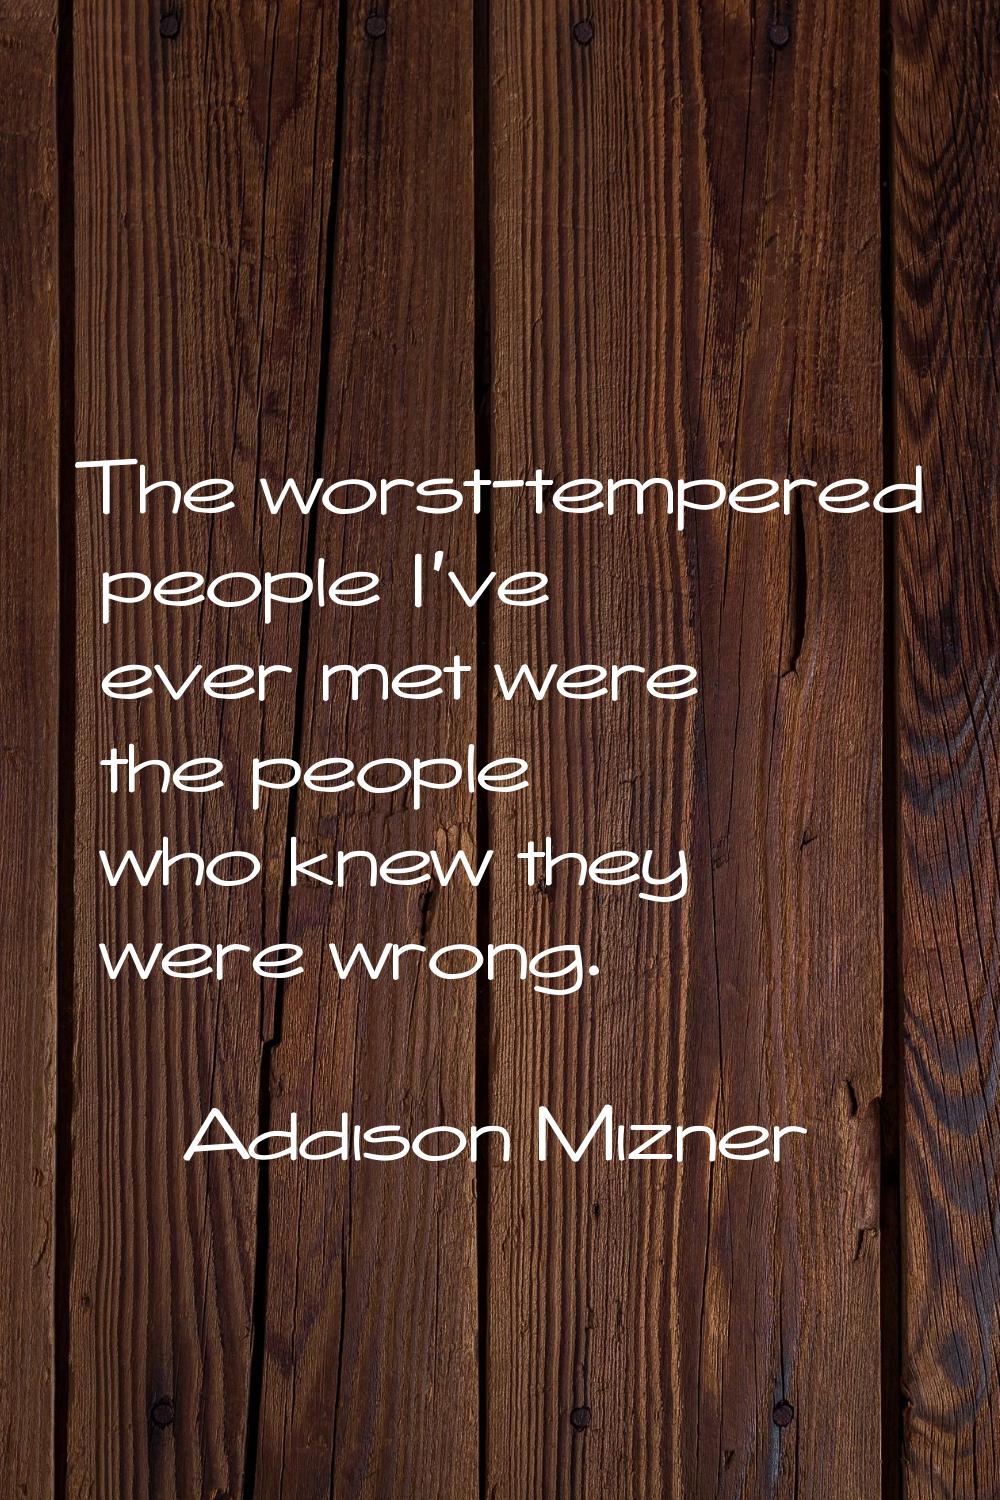 The worst-tempered people I've ever met were the people who knew they were wrong.